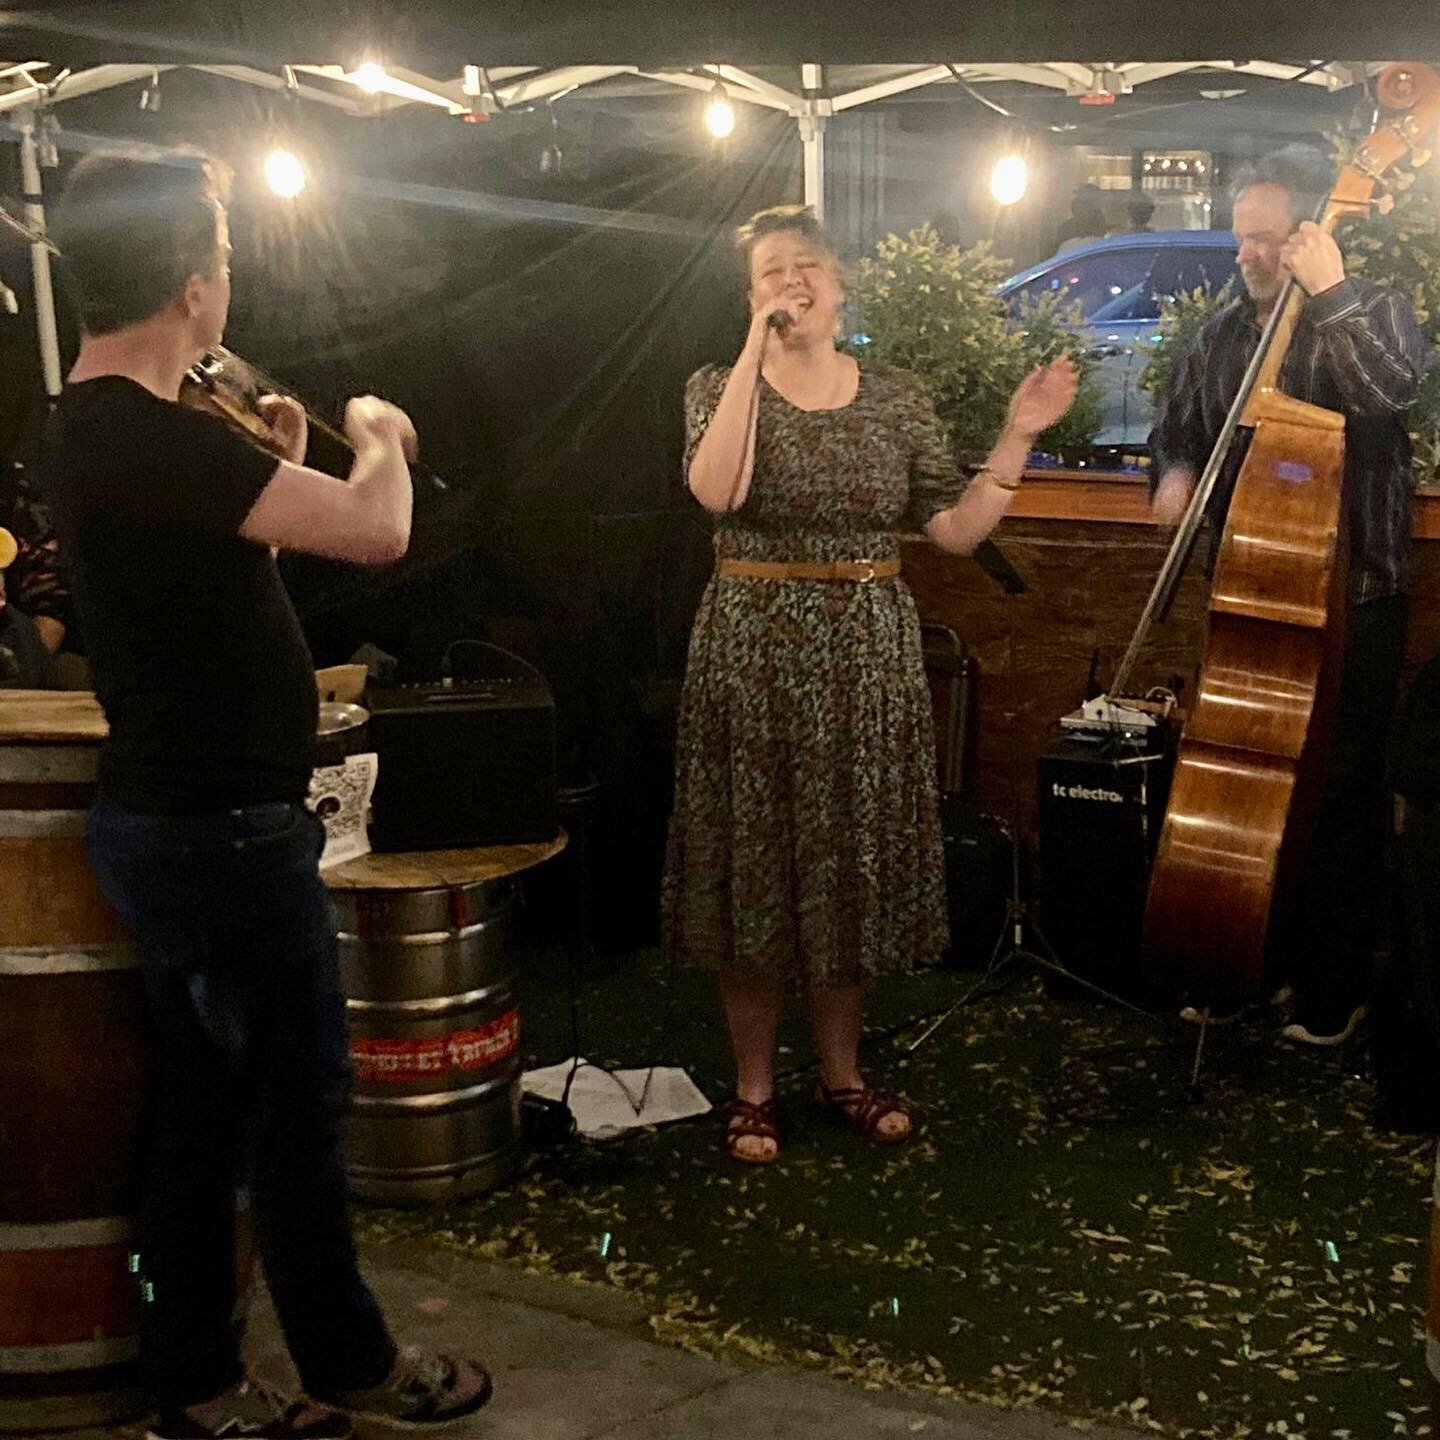 A fabulous evening listening to Colm, Geoff, Joe &amp; Wade playing gorgeous, soulful music at Belle Cora, North Beach, San Francisco! Agus m&iacute;le bu&iacute;ochas Colm for inviting me to sing a few jazz numbers- a pleasure as always! 🎶🎶